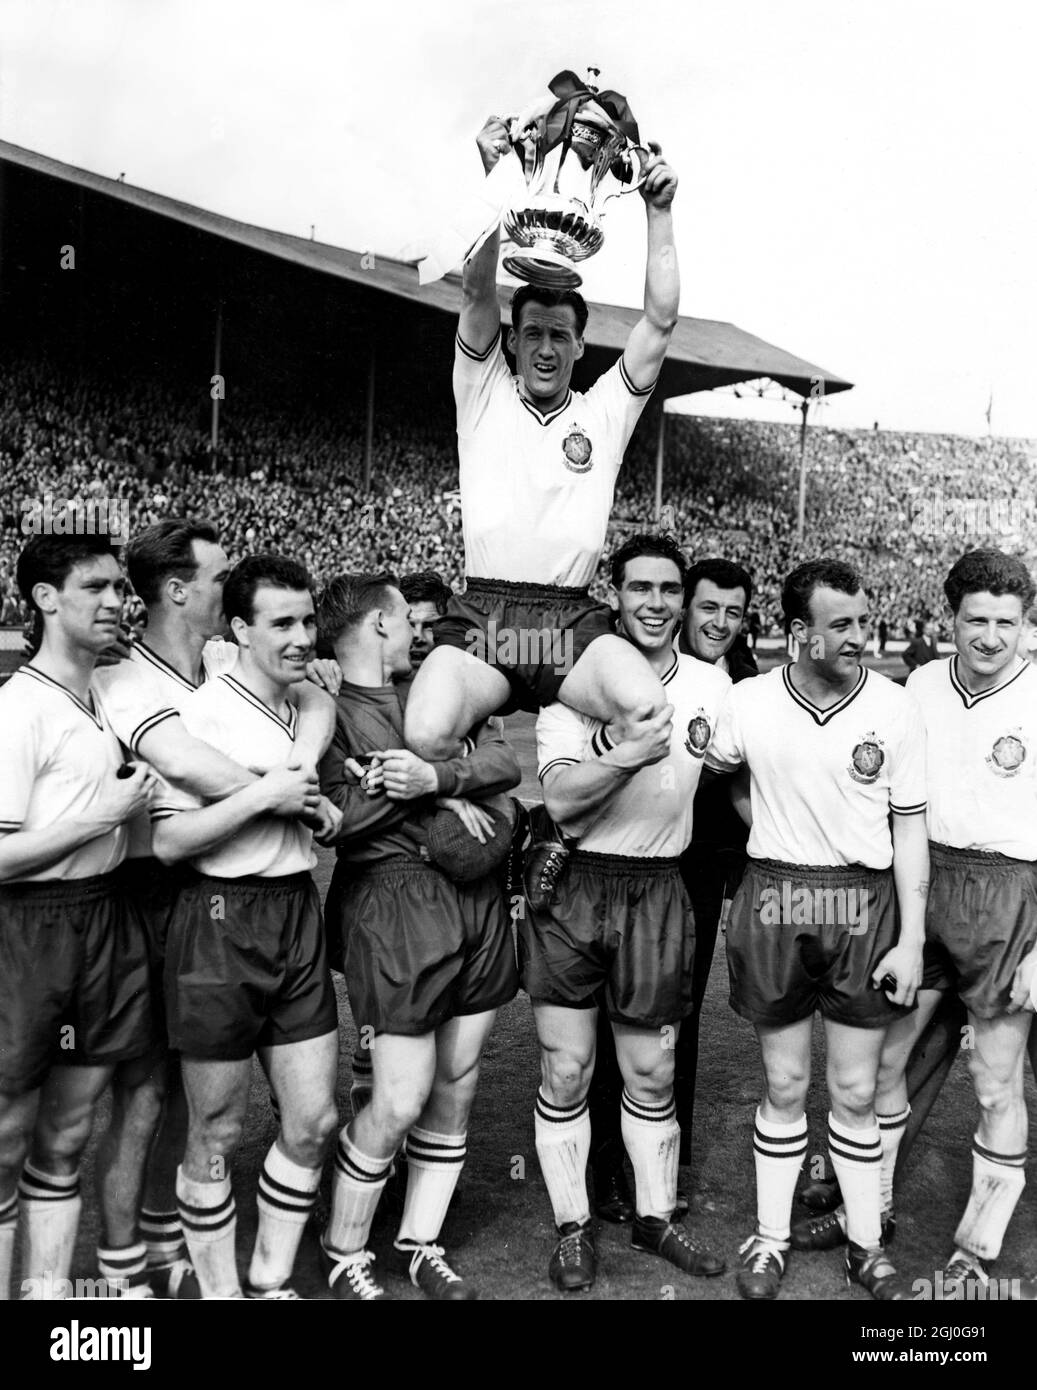 1958 FA Cup Final Manchester United v Bolton Wanderers Nat Lofthouse, the Bolton centre-forward and captain, who scored both of his side's goals is chaired off the field whilst, holding the FA Cup trophy. 3rd May 1958 Stock Photo